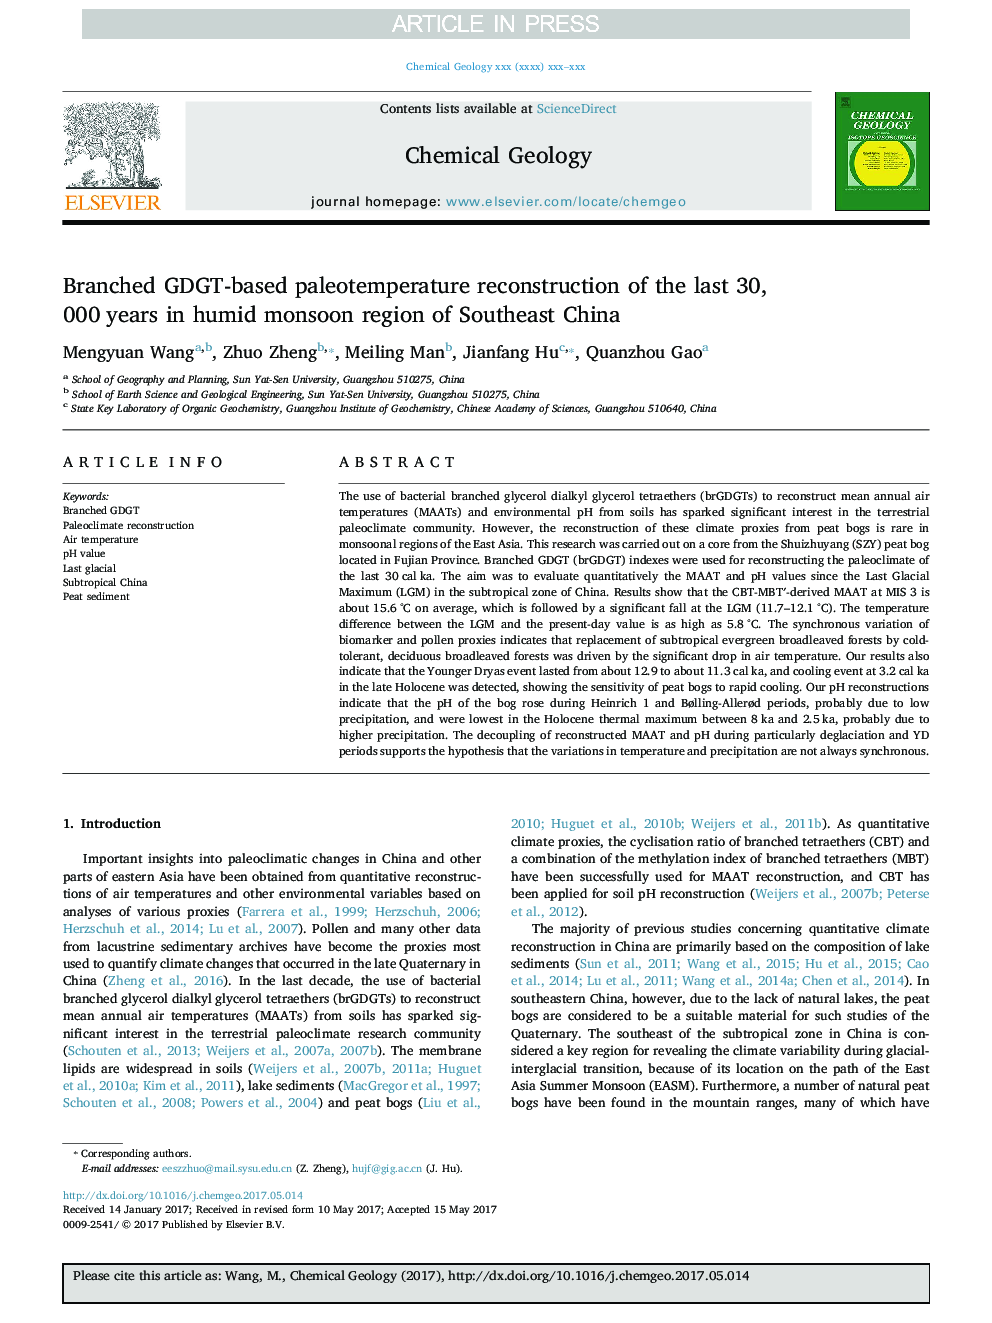 Branched GDGT-based paleotemperature reconstruction of the last 30,000Â years in humid monsoon region of Southeast China